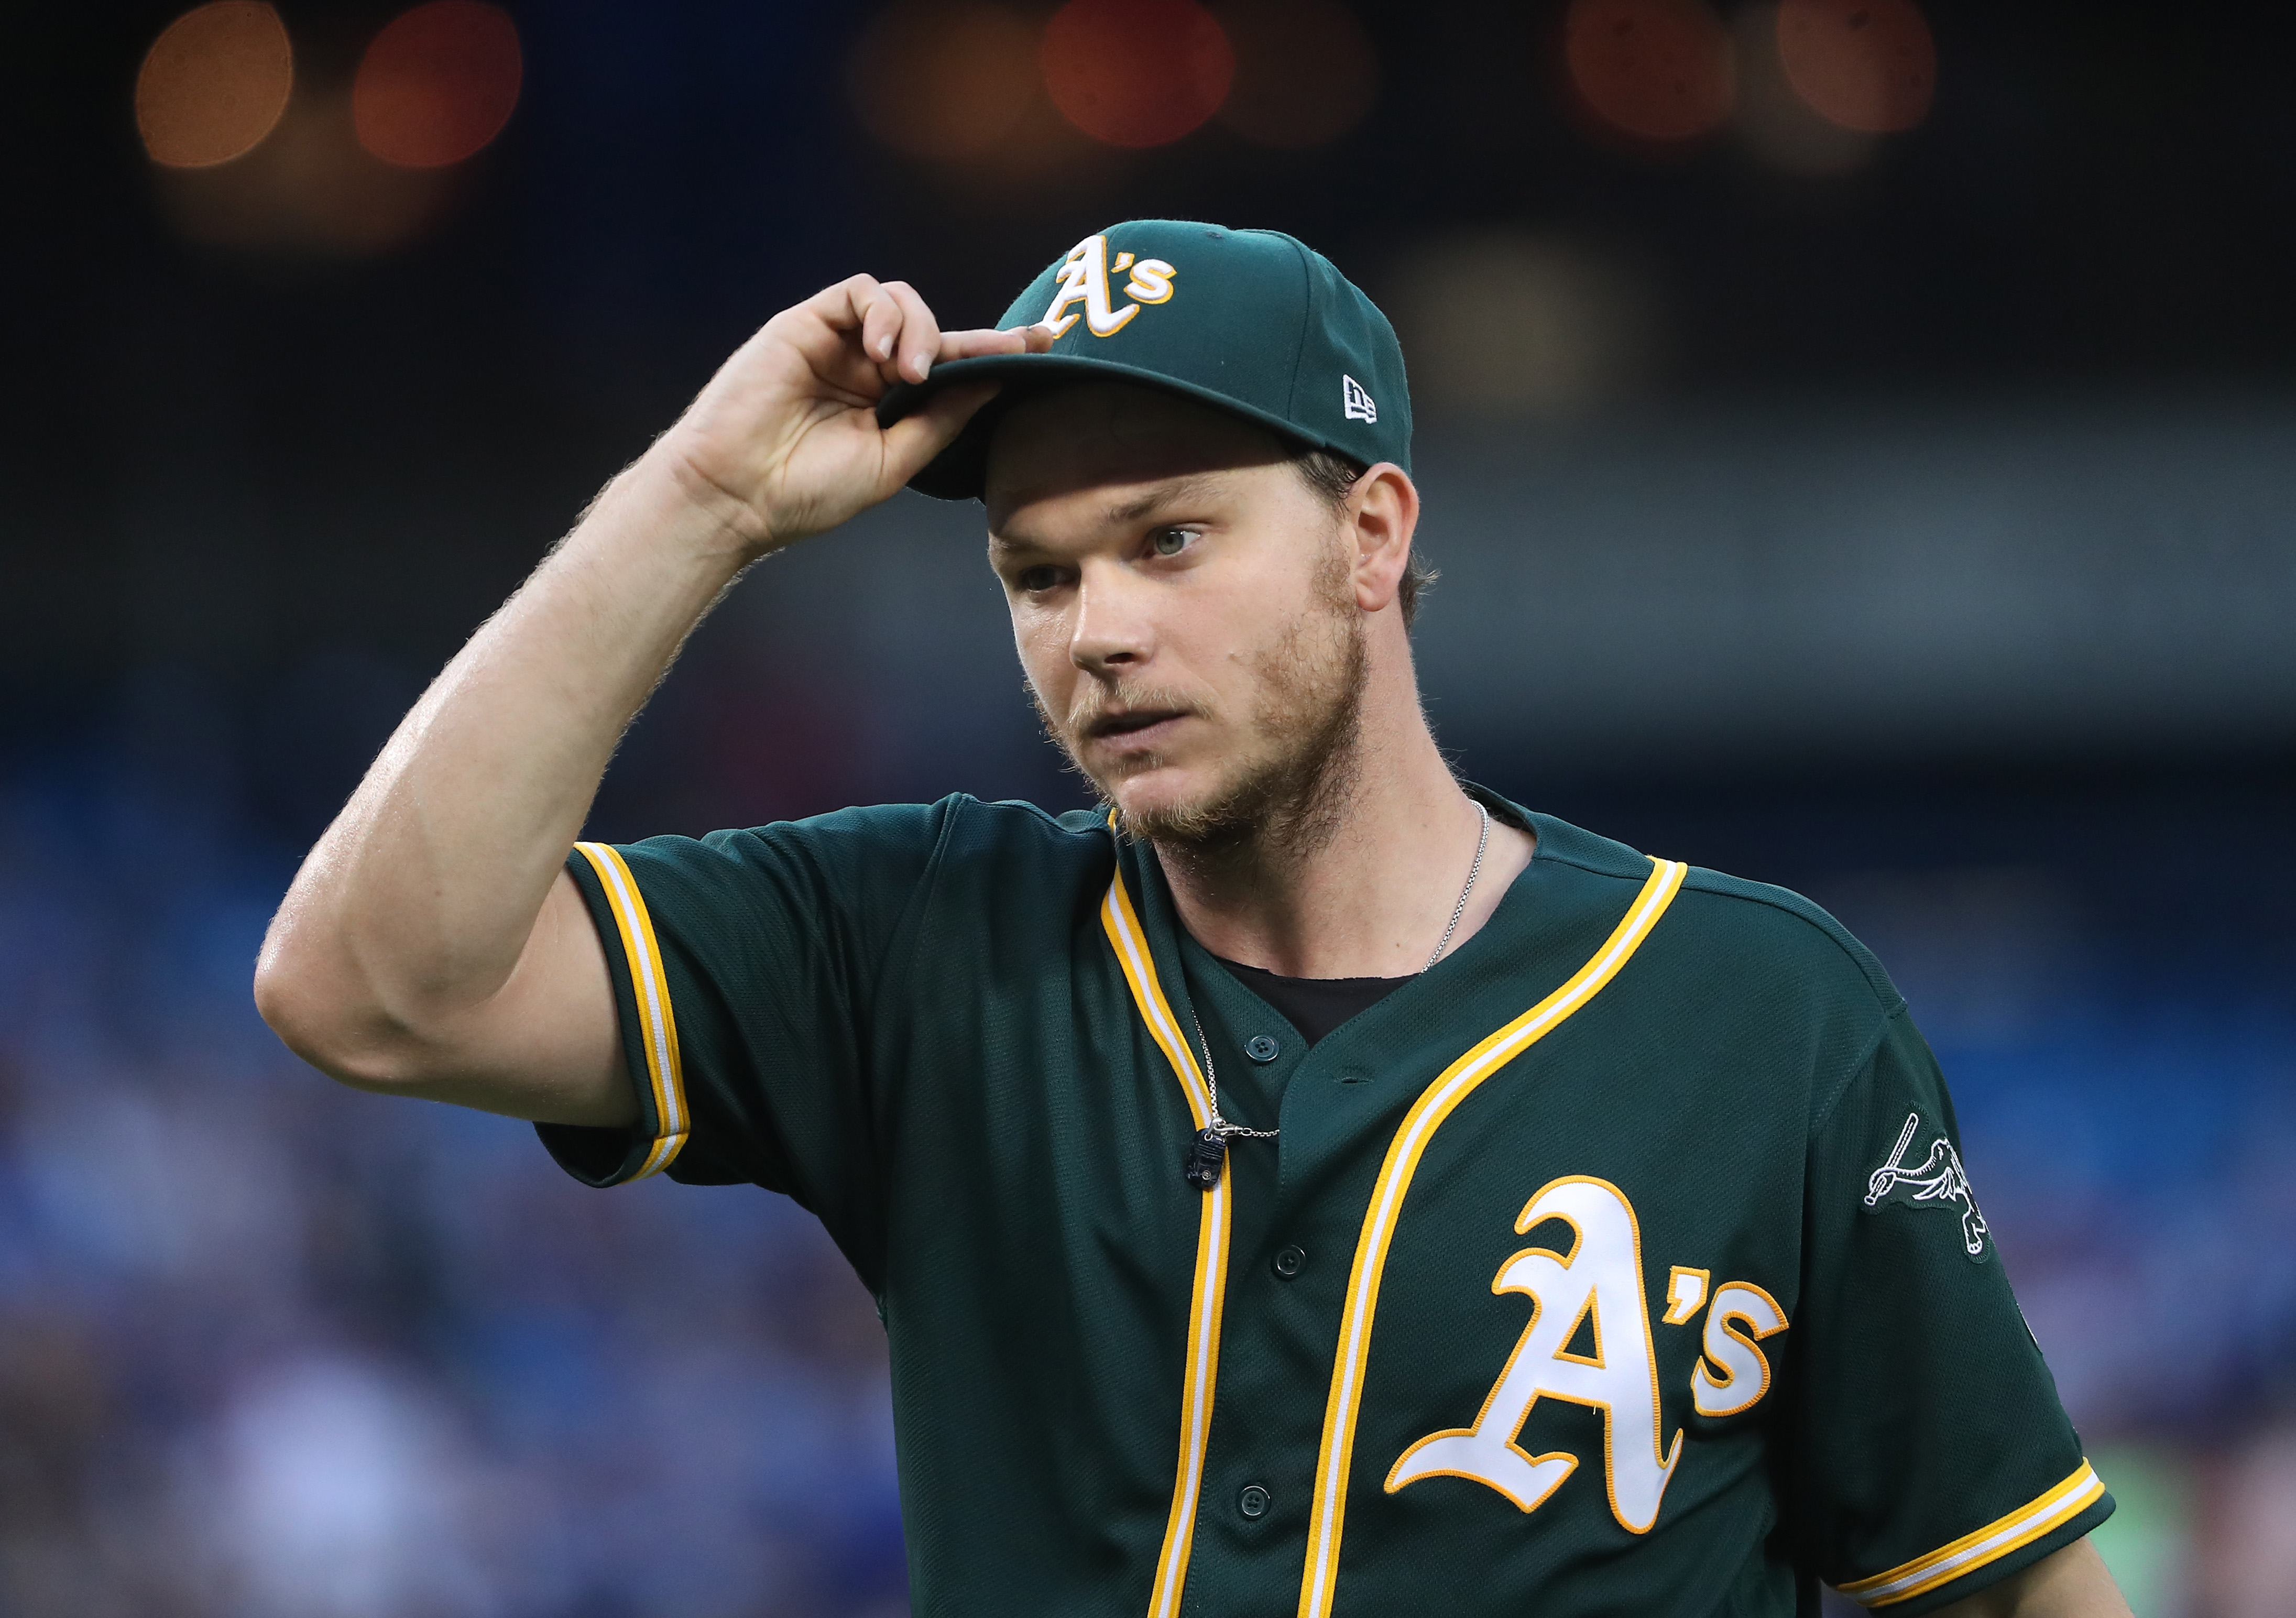 A's routed 11-2 by Mariners